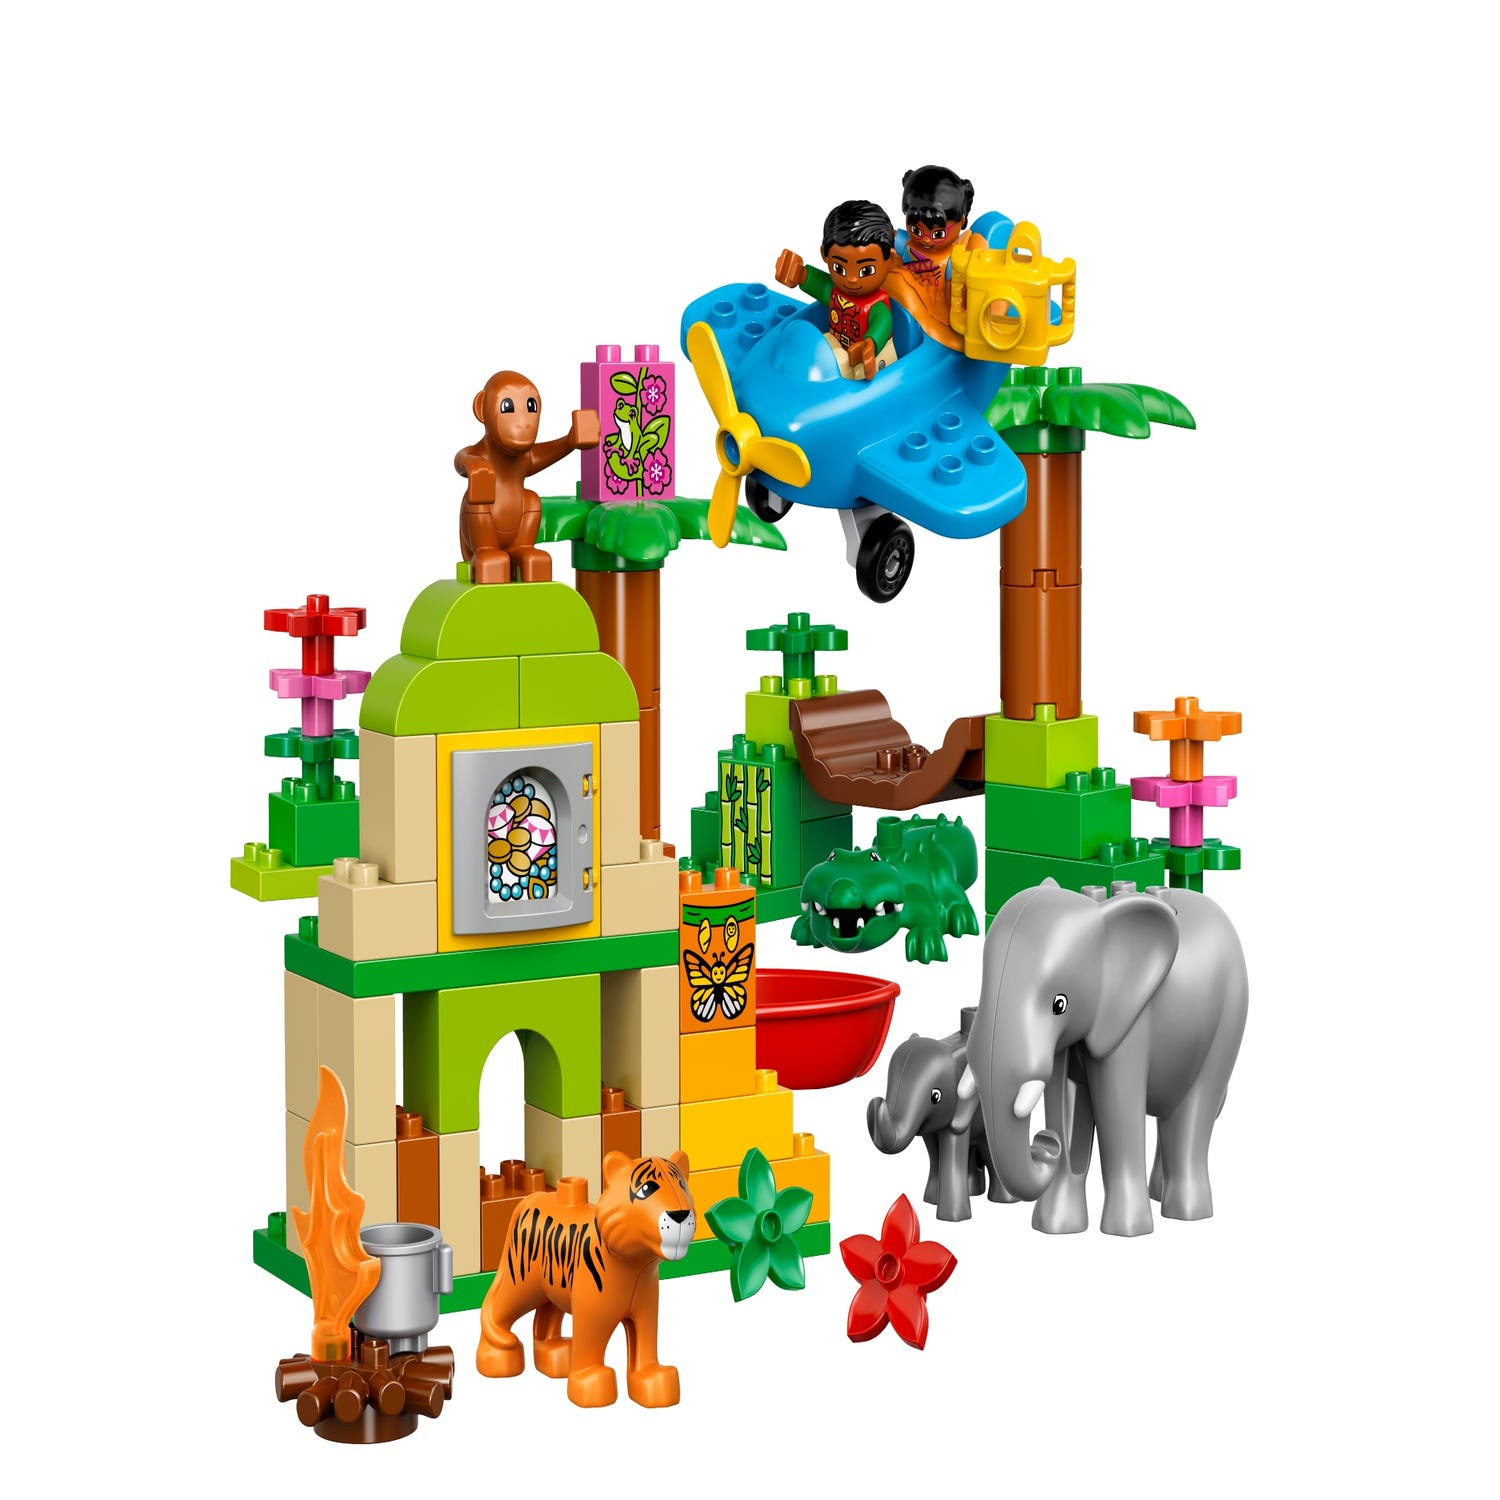 Jungle 10804 | DUPLO® | Buy online at the LEGO® Shop GB